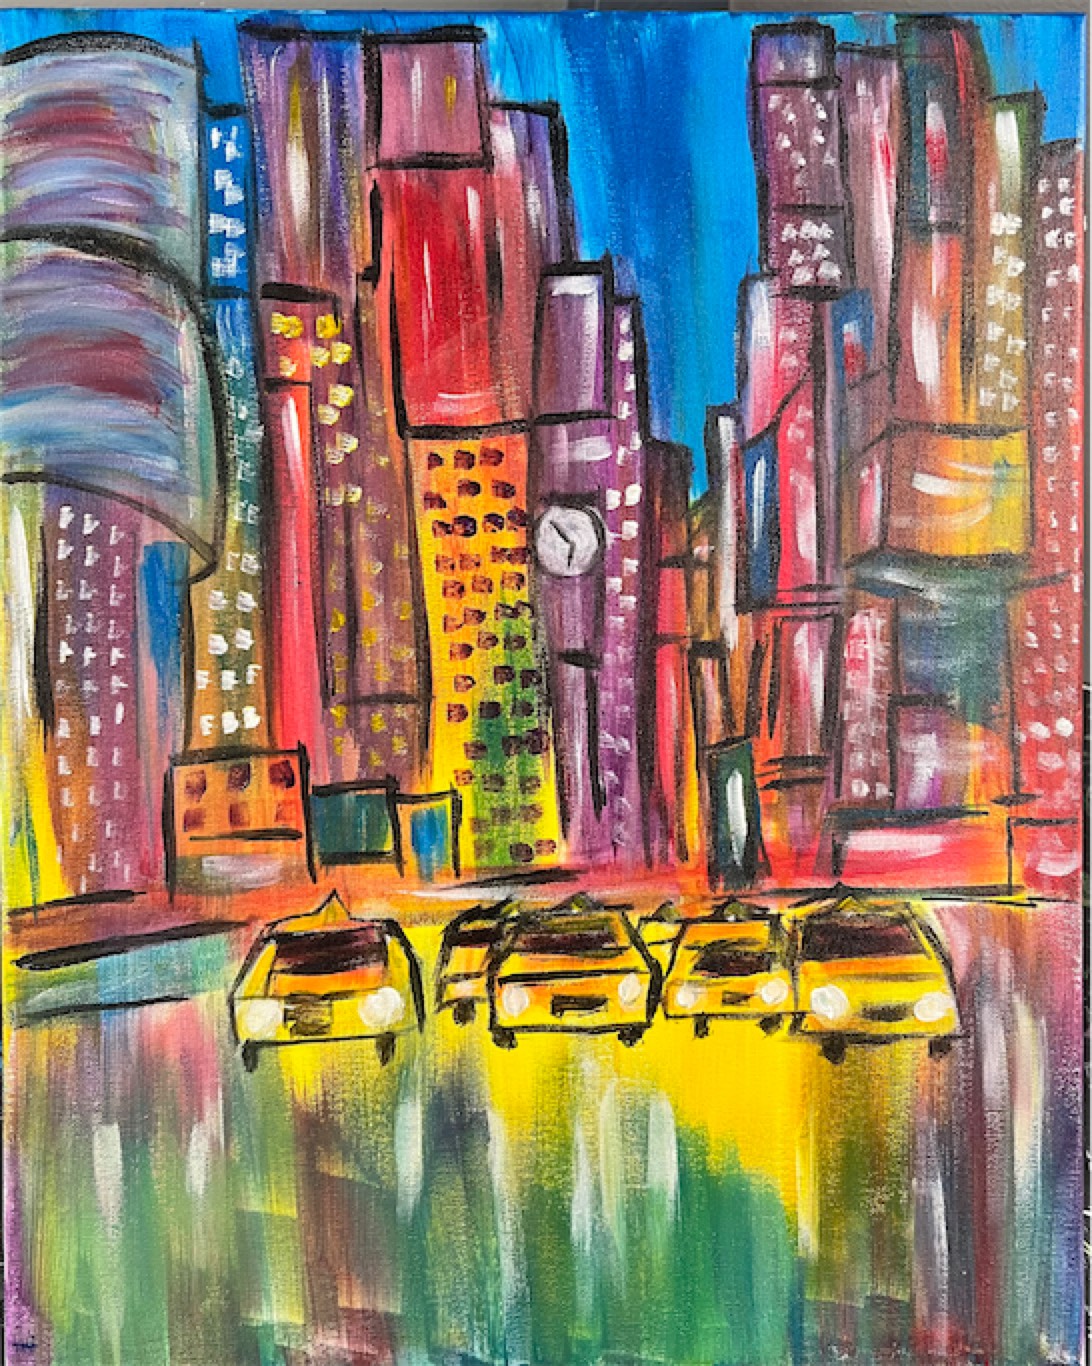 Sip & Paint Night in the City - Free Parking